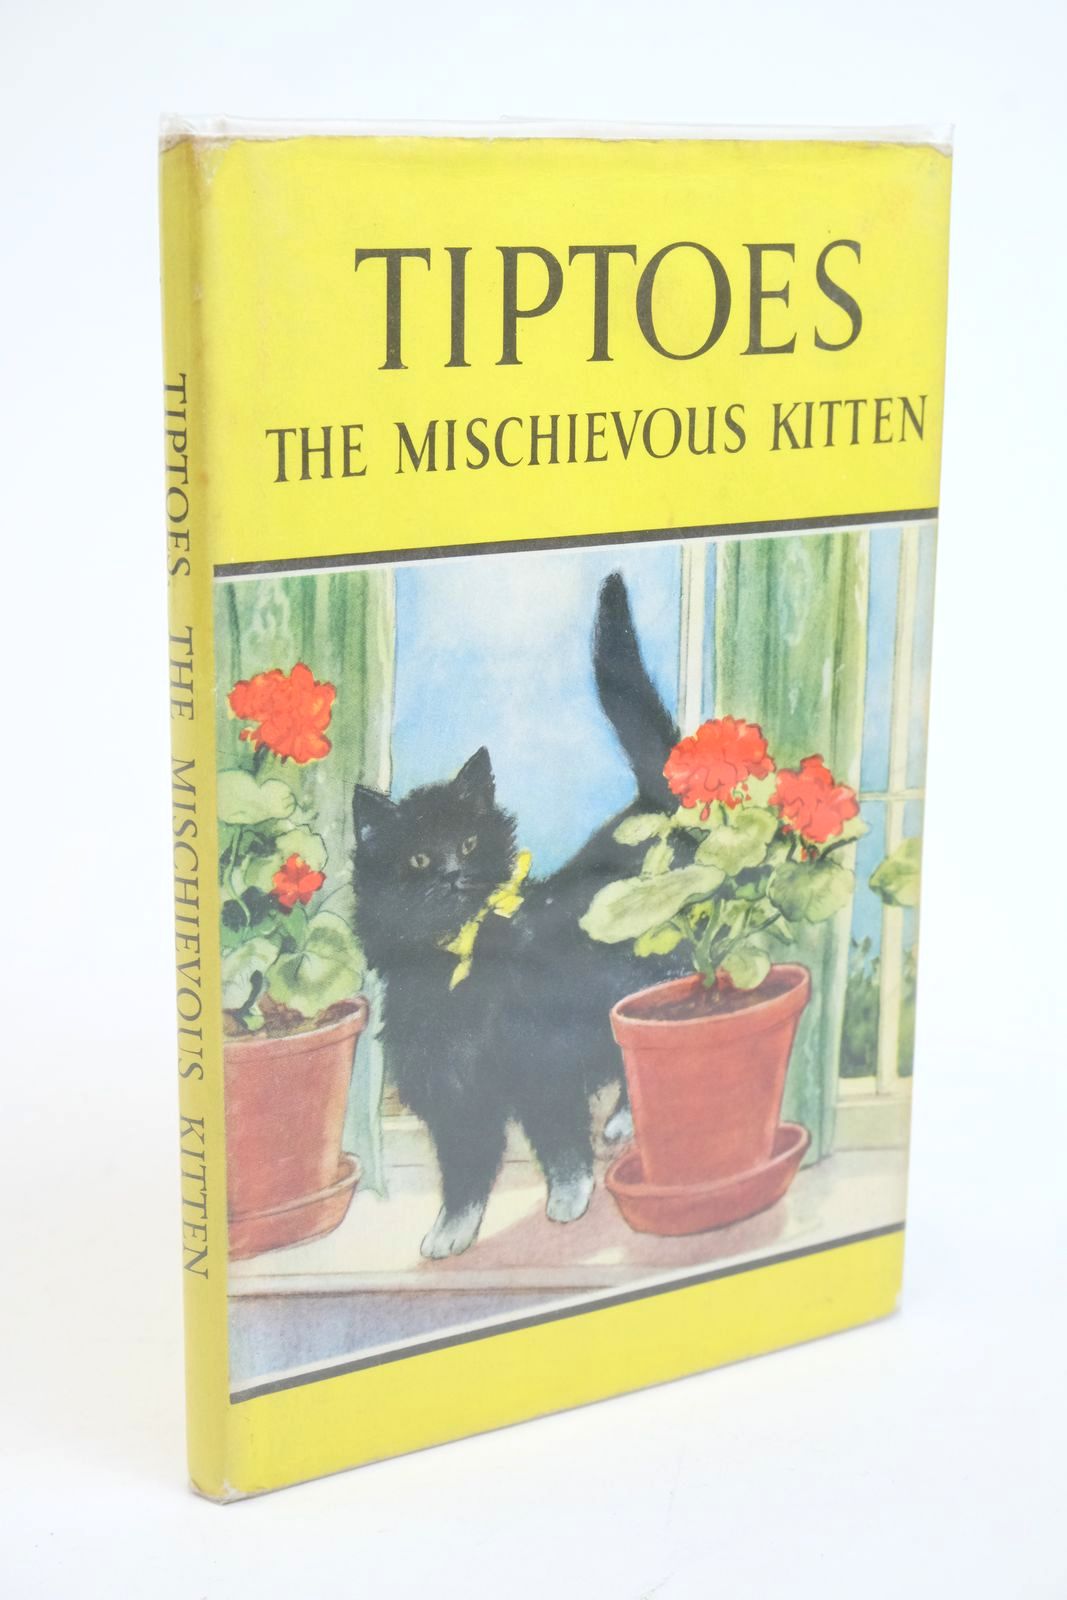 Photo of TIPTOES THE MISCHIEVOUS KITTEN written by Barr, Noel illustrated by Hickling, P.B. published by Wills &amp; Hepworth Ltd. (STOCK CODE: 1322393)  for sale by Stella & Rose's Books